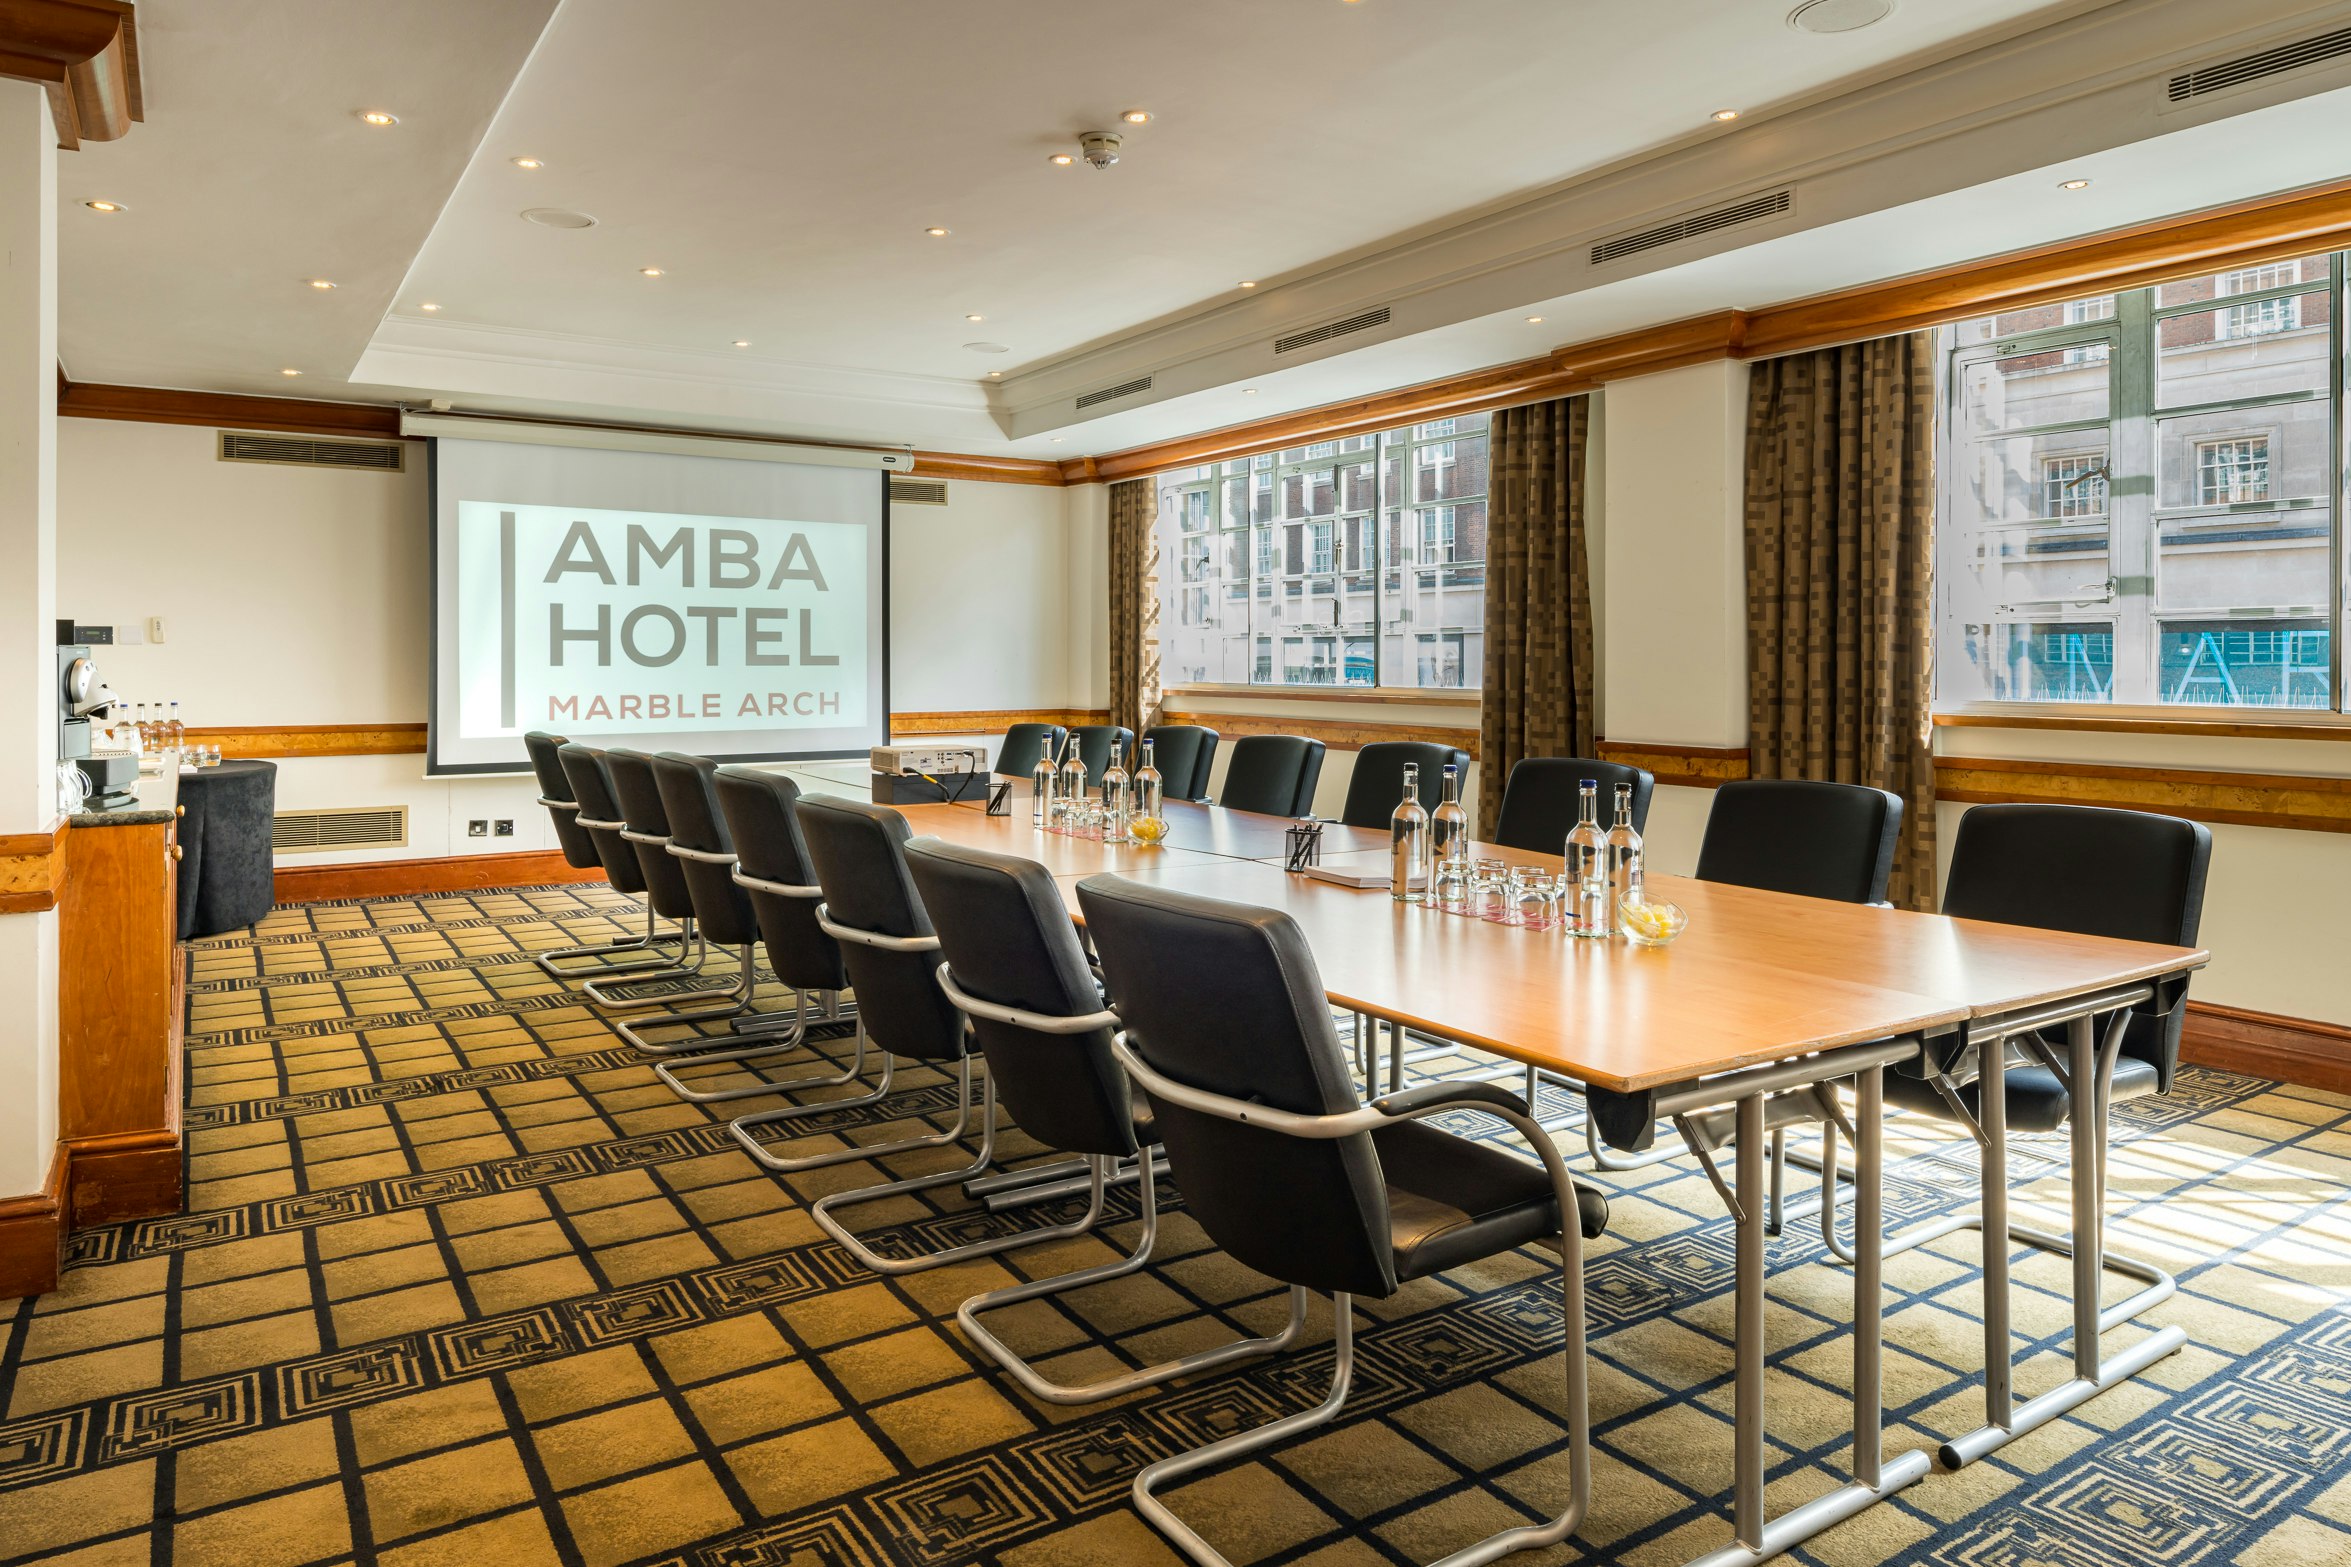 Amba Hotel Marble Arch - Green Park image 1